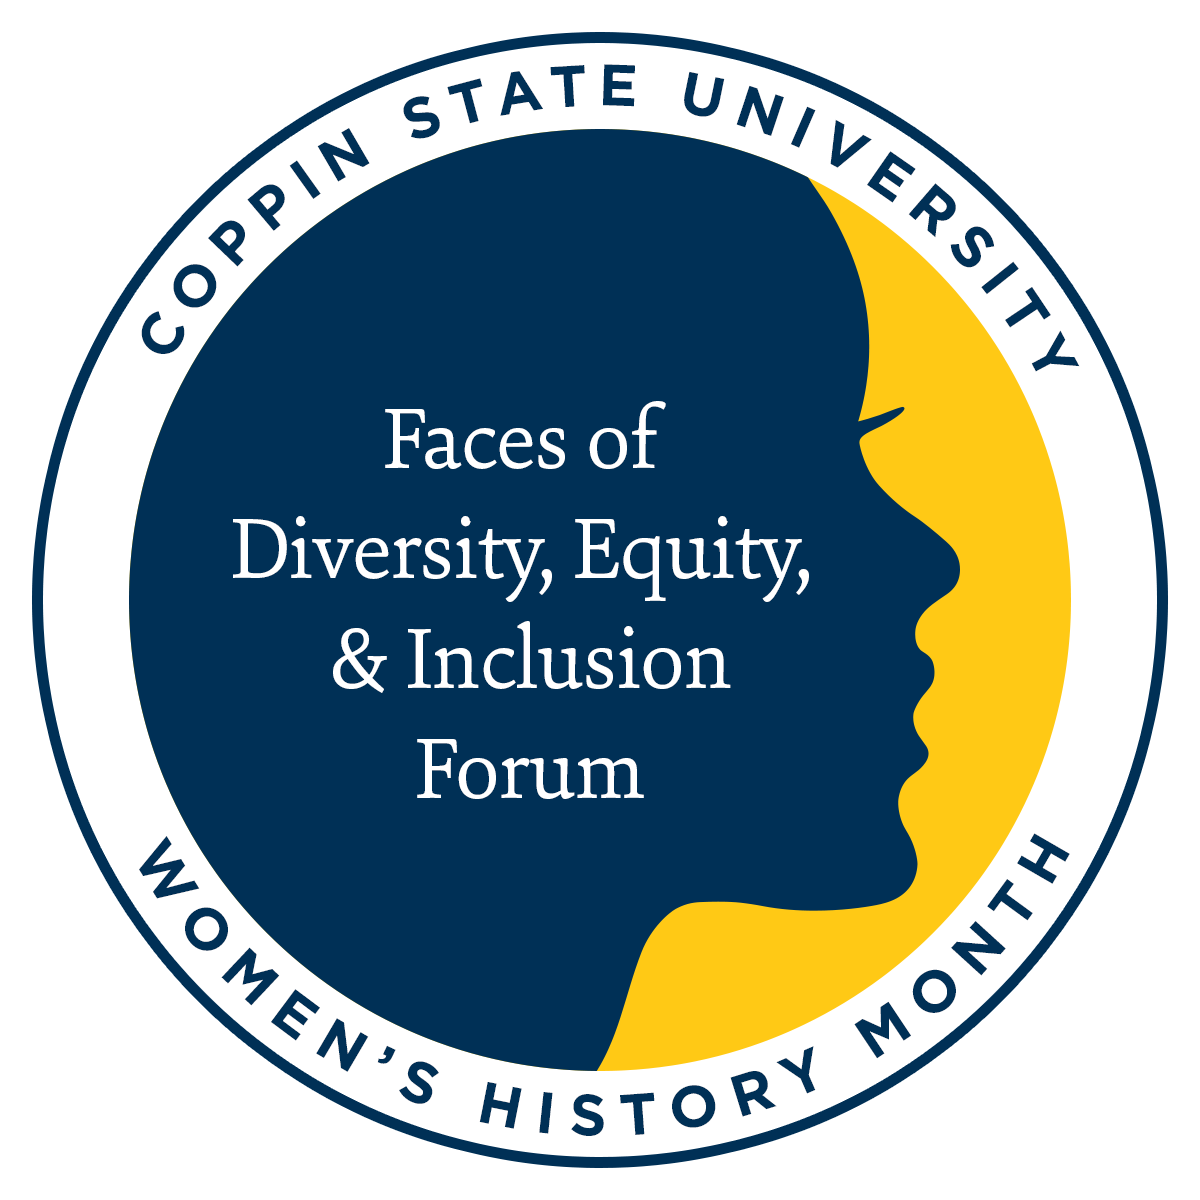 Women's History Month - Faces of Diversity, Equity, & Inclusion Forum